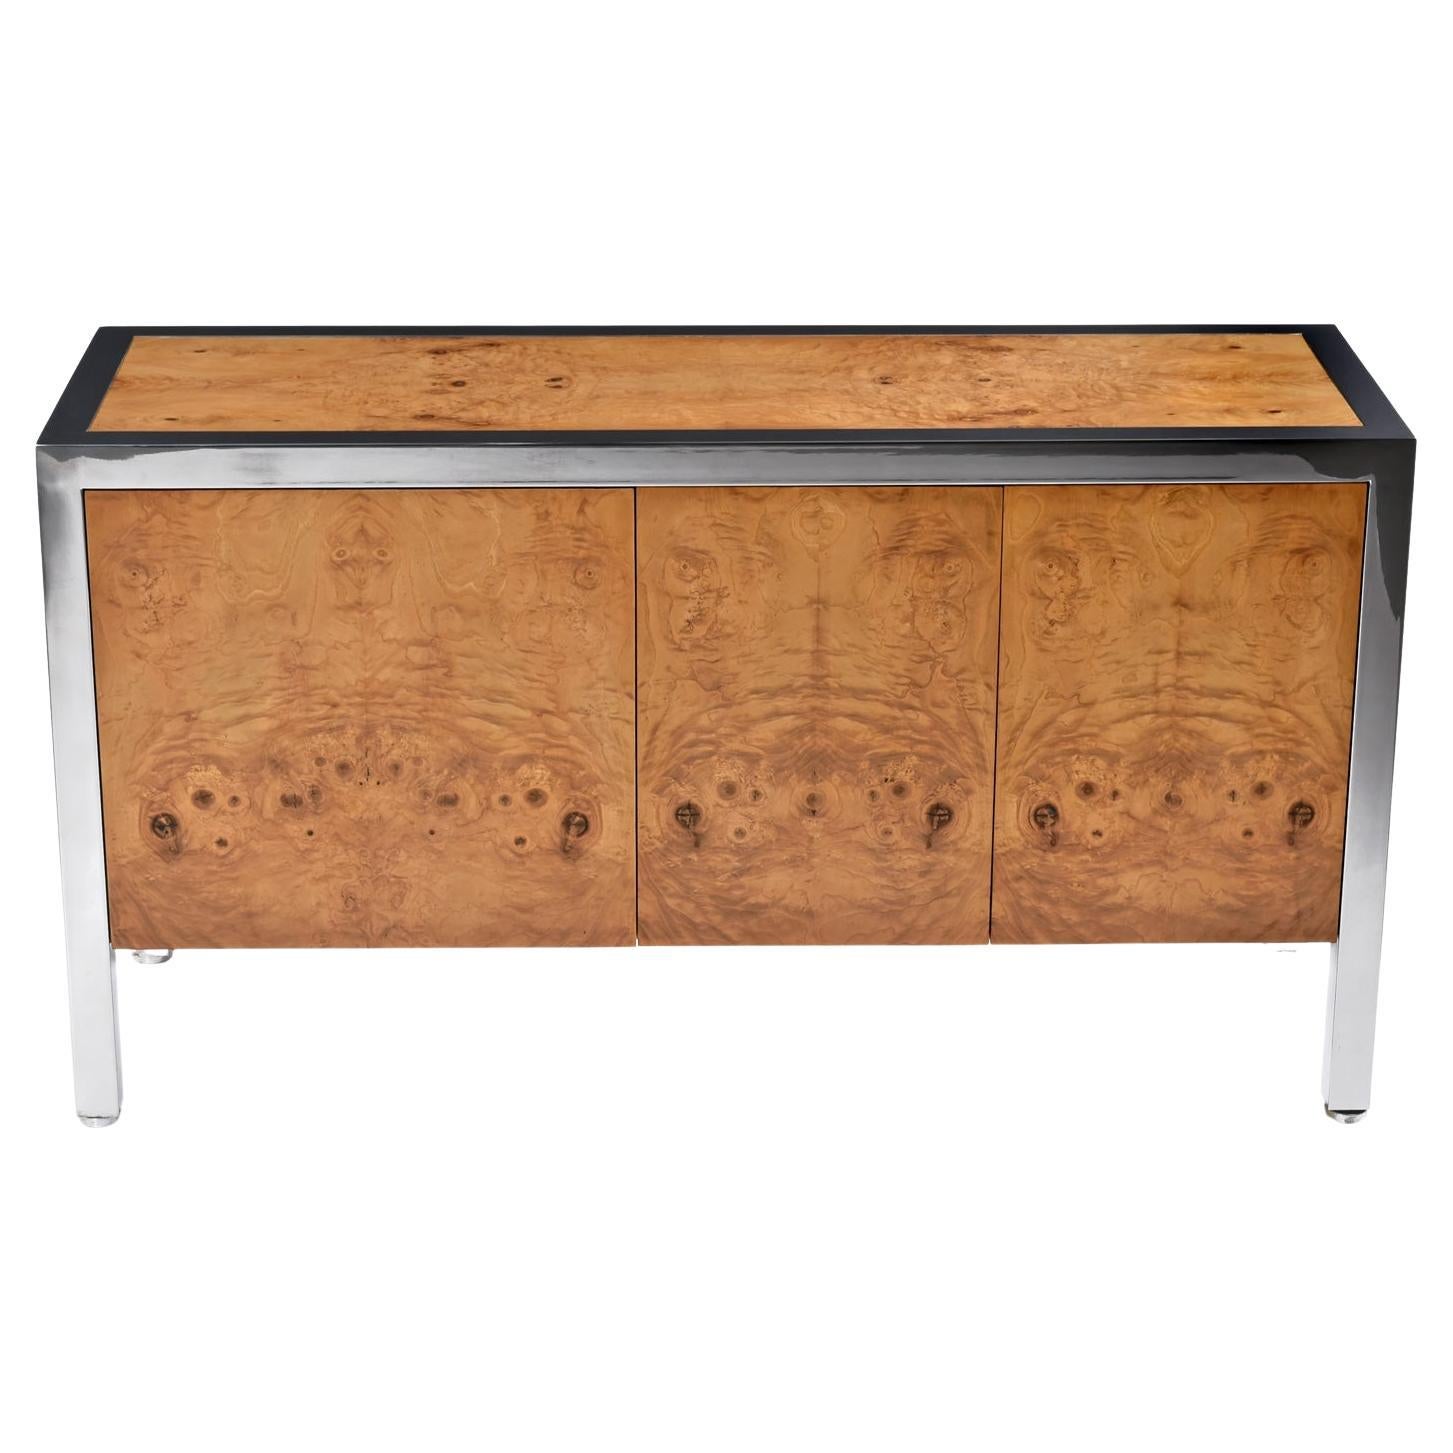 1970's, Leon Rosen for Pace Burl Wood Stainless Steel Credenza